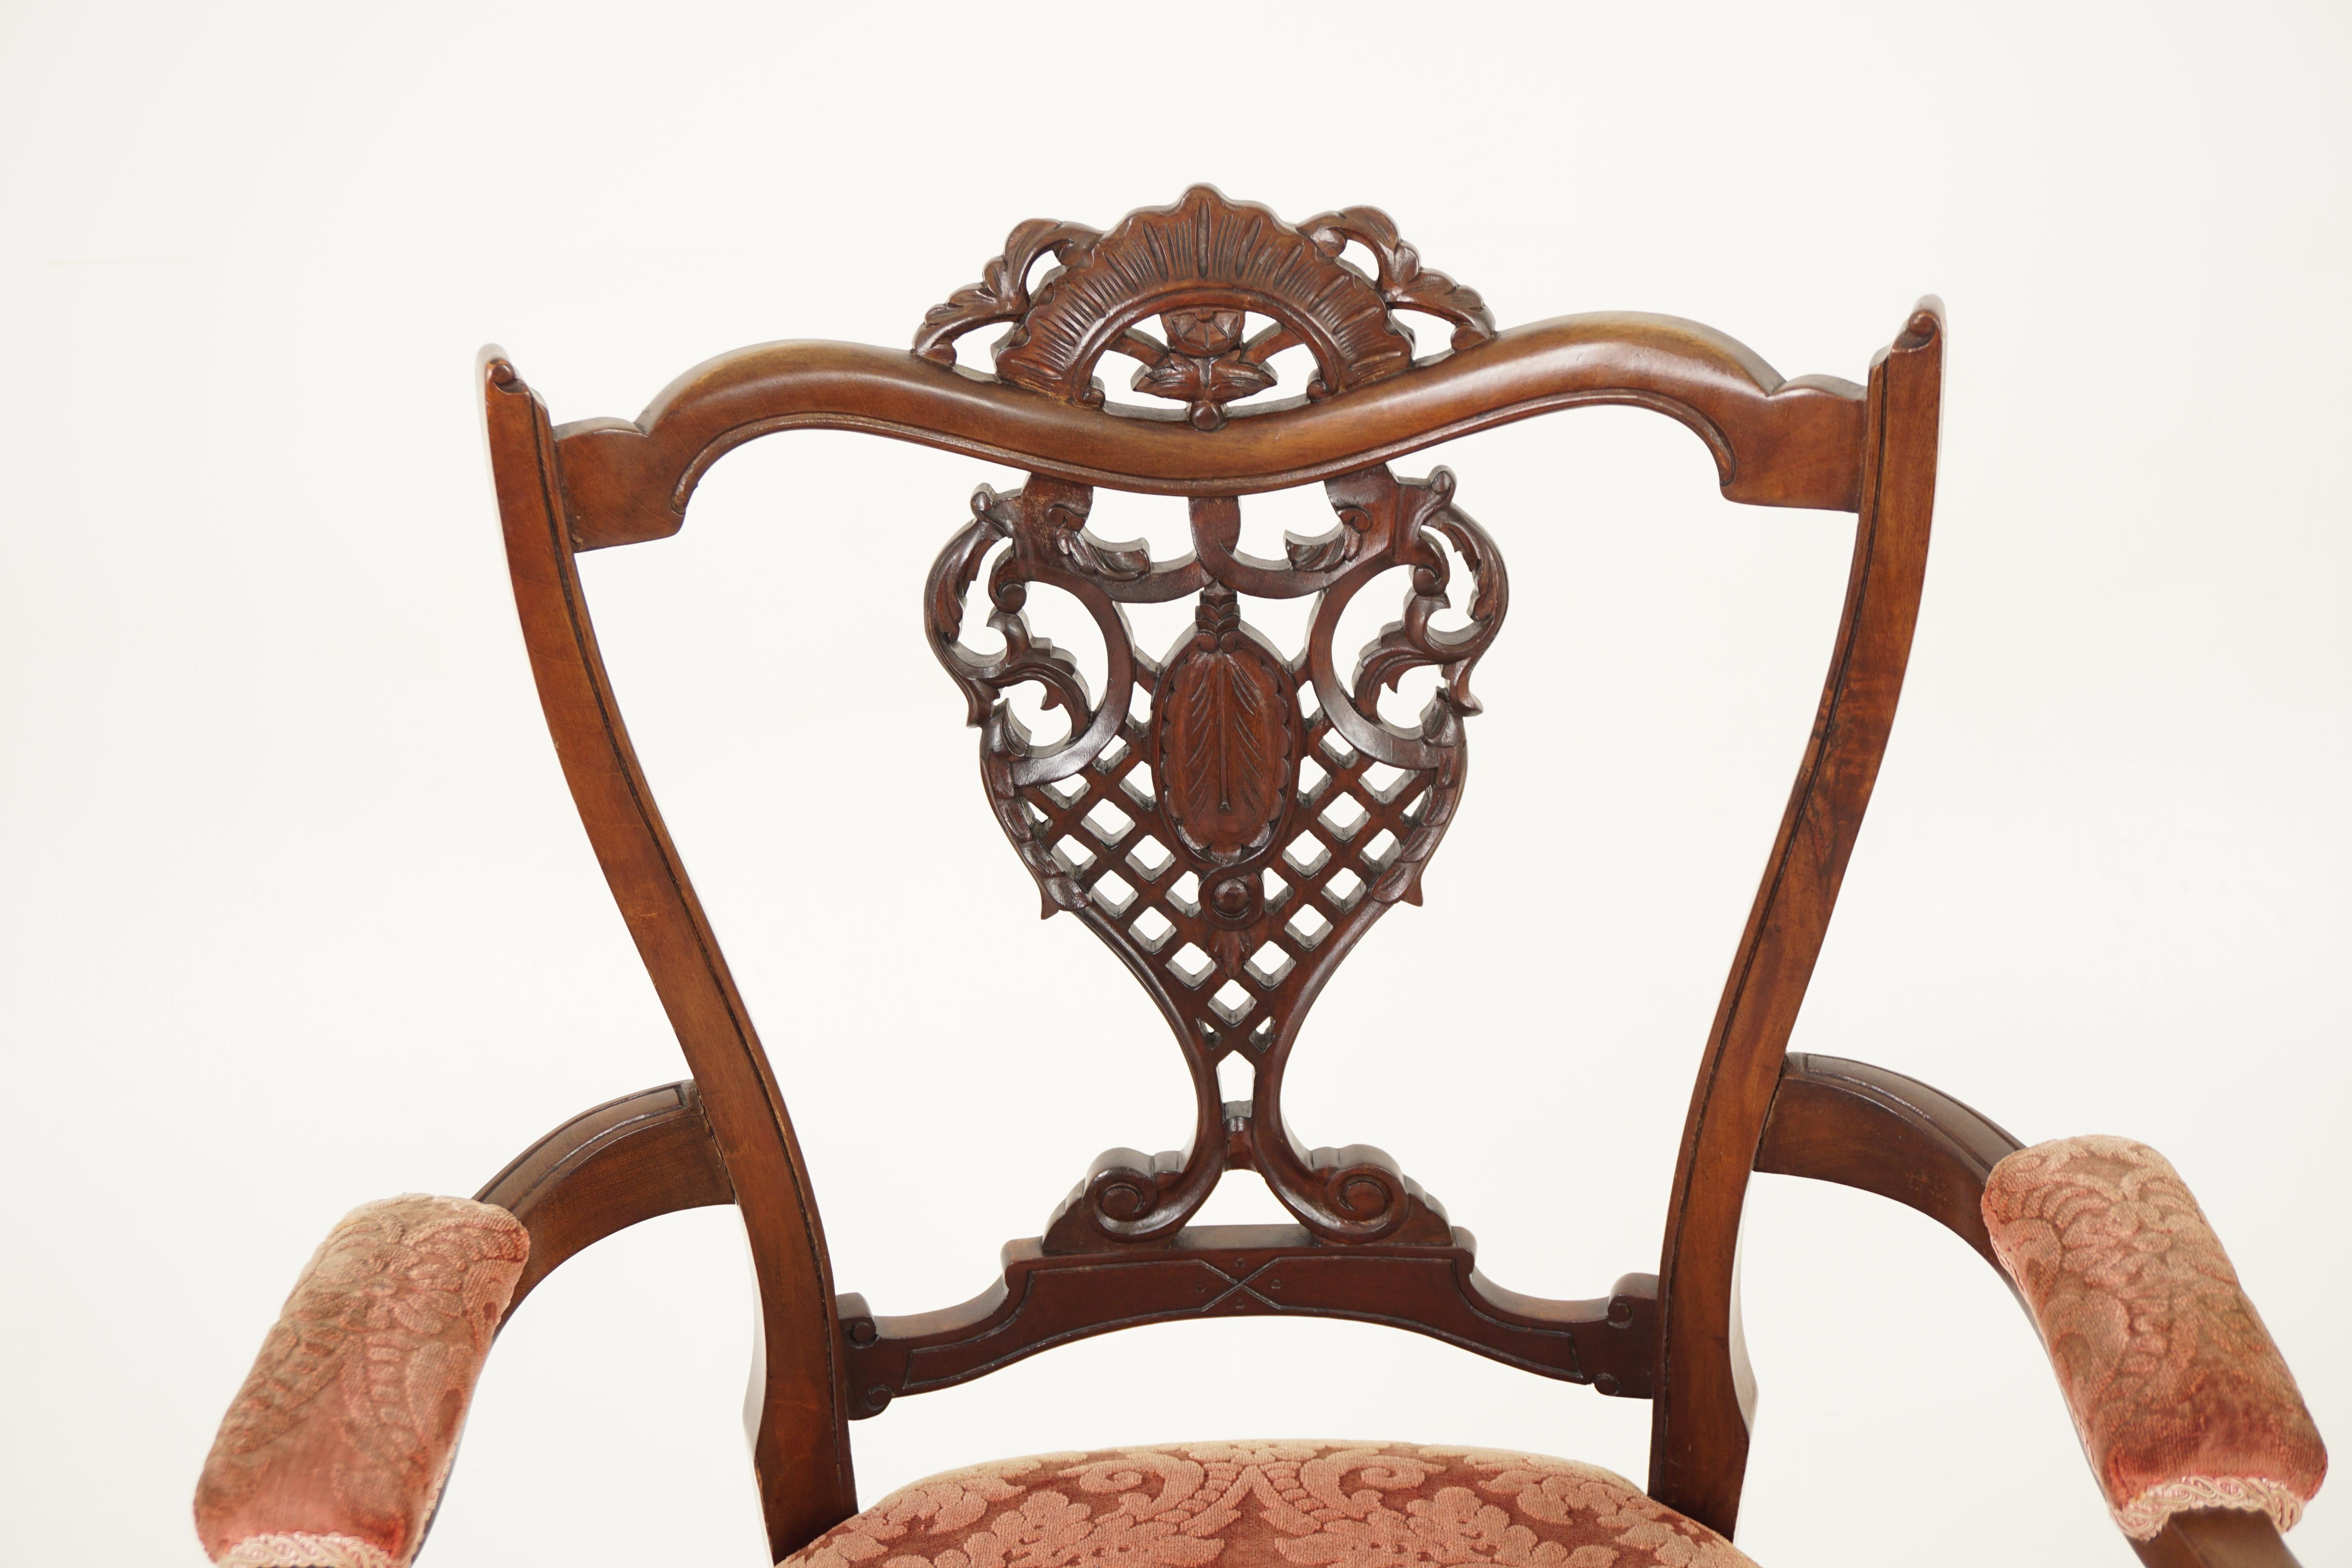 Hand-Crafted Antique Walnut Chairs, Pair of Edwardian Carved Arm Chairs, Scotland 1900, H983 For Sale